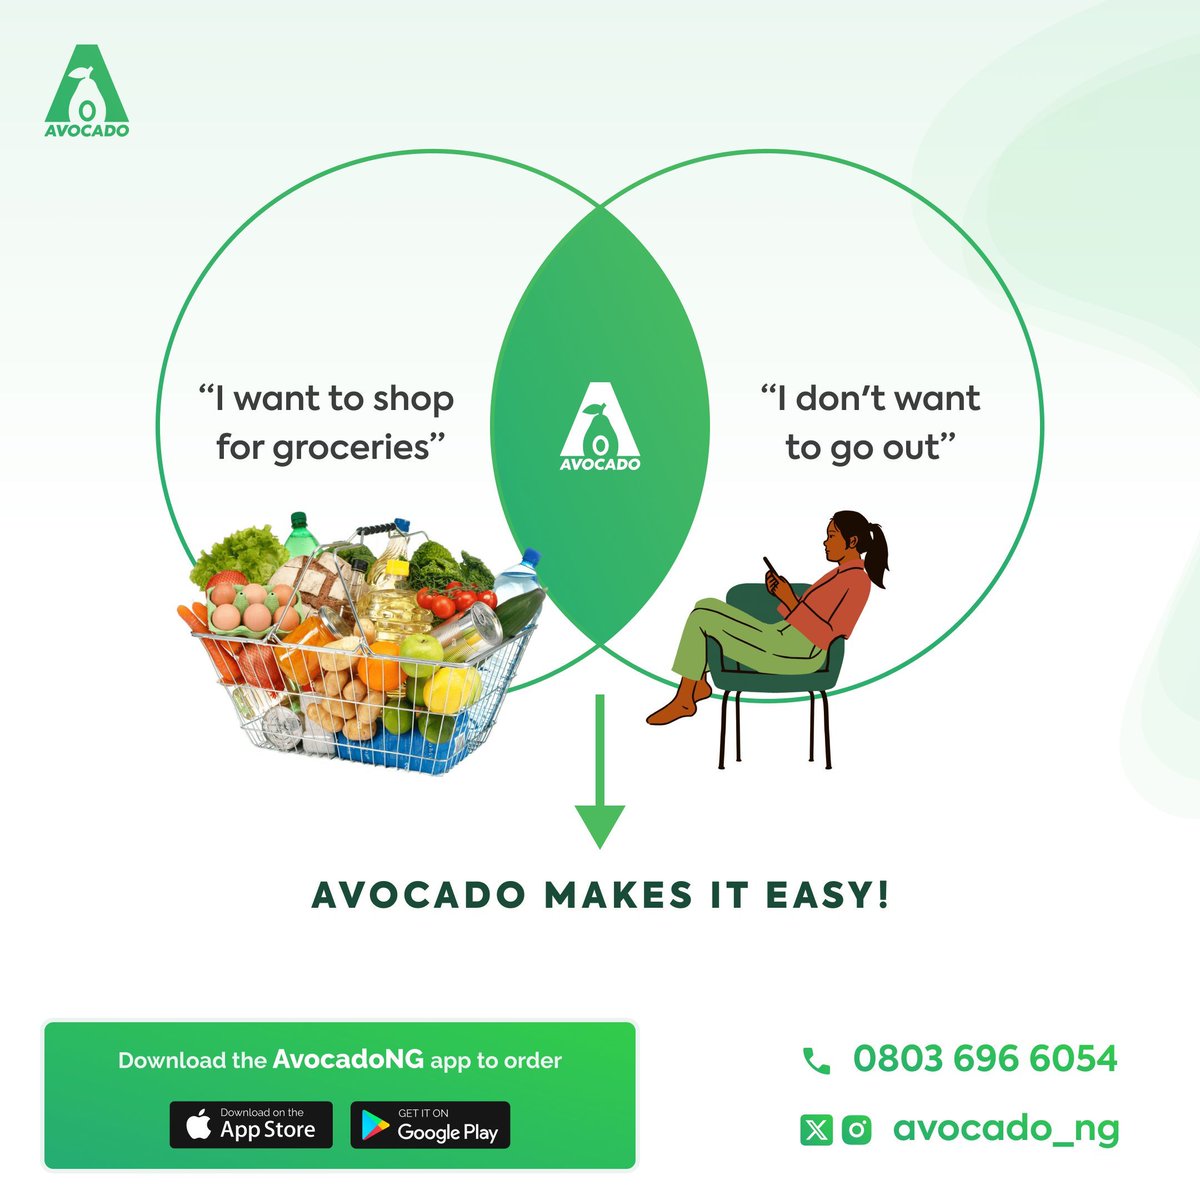 We are the emissary of convenient shopping experience. 
Download the Avocado  NG app today to enjoy the soft life.

#AvocadoNG #avocado_ng #ordernow #delivery #akure #groceries #groceryshopping